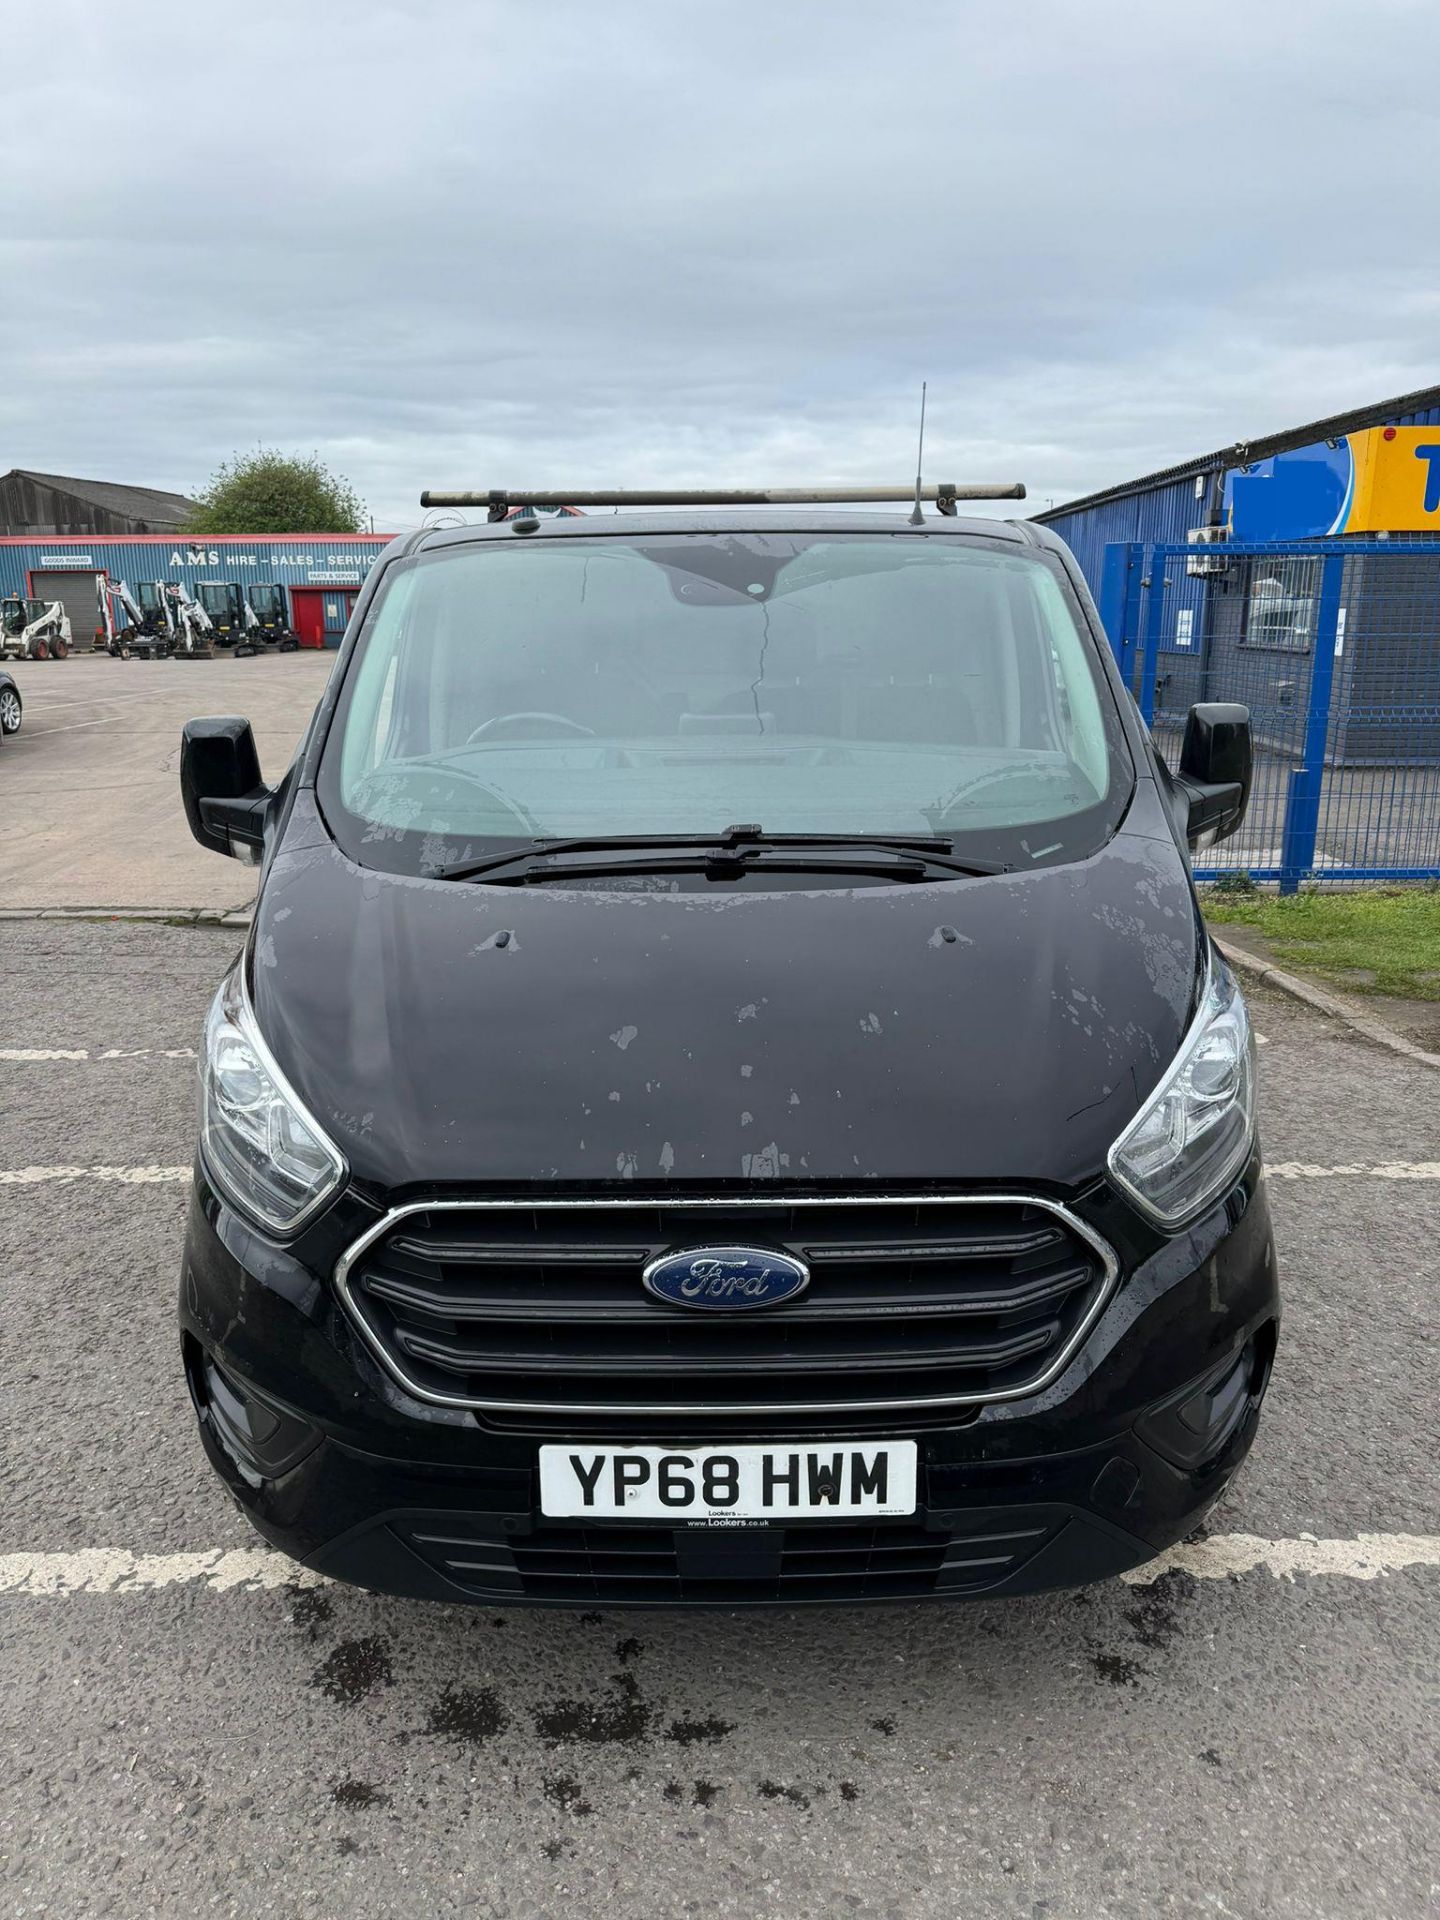 2018 68 FORD TRANSIT CUSTOM LIMITED PANEL VAN - 114K MILES - EURO 6 - AIR CON -  ALLOY WHEELS  - Image 10 of 12